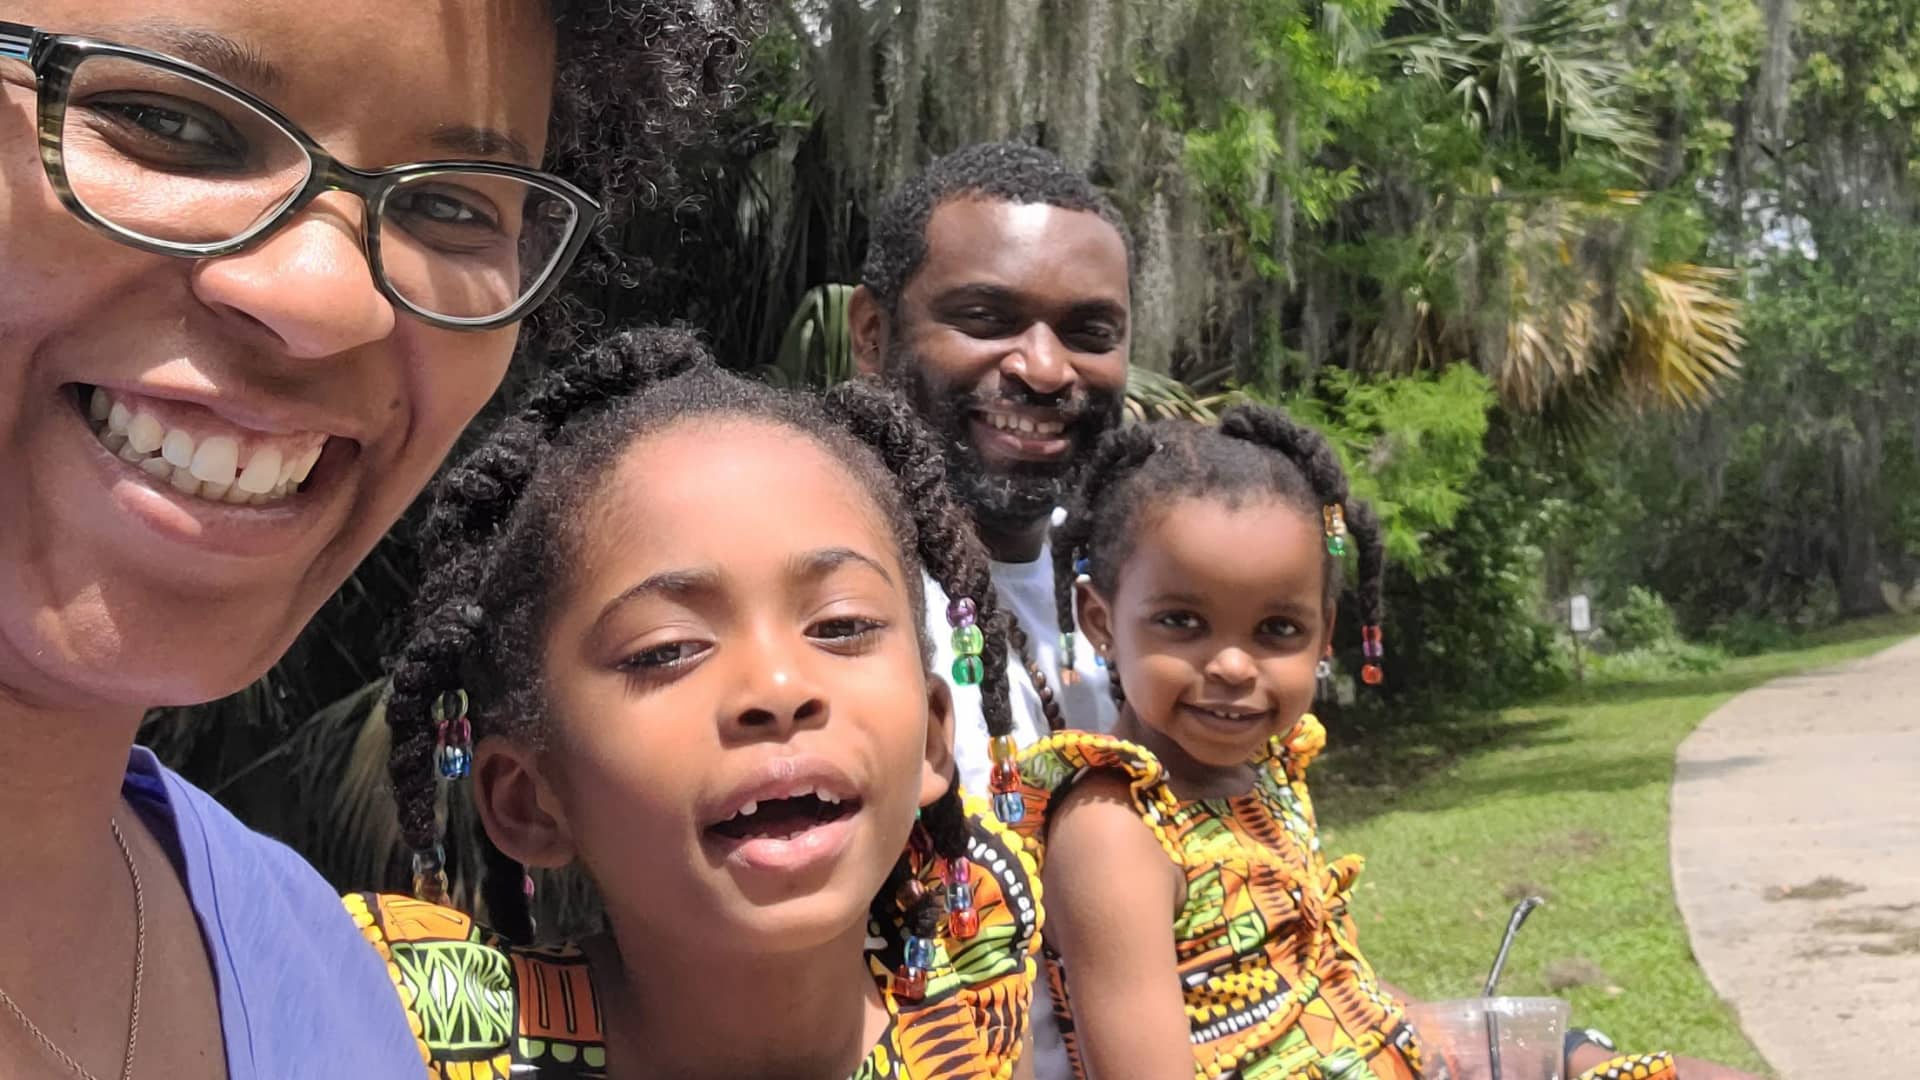 Adrienne Streater, pictured with her husband Douglas and two daughters, says having access to paid family leave would have helped tremendously when she was a new mother.